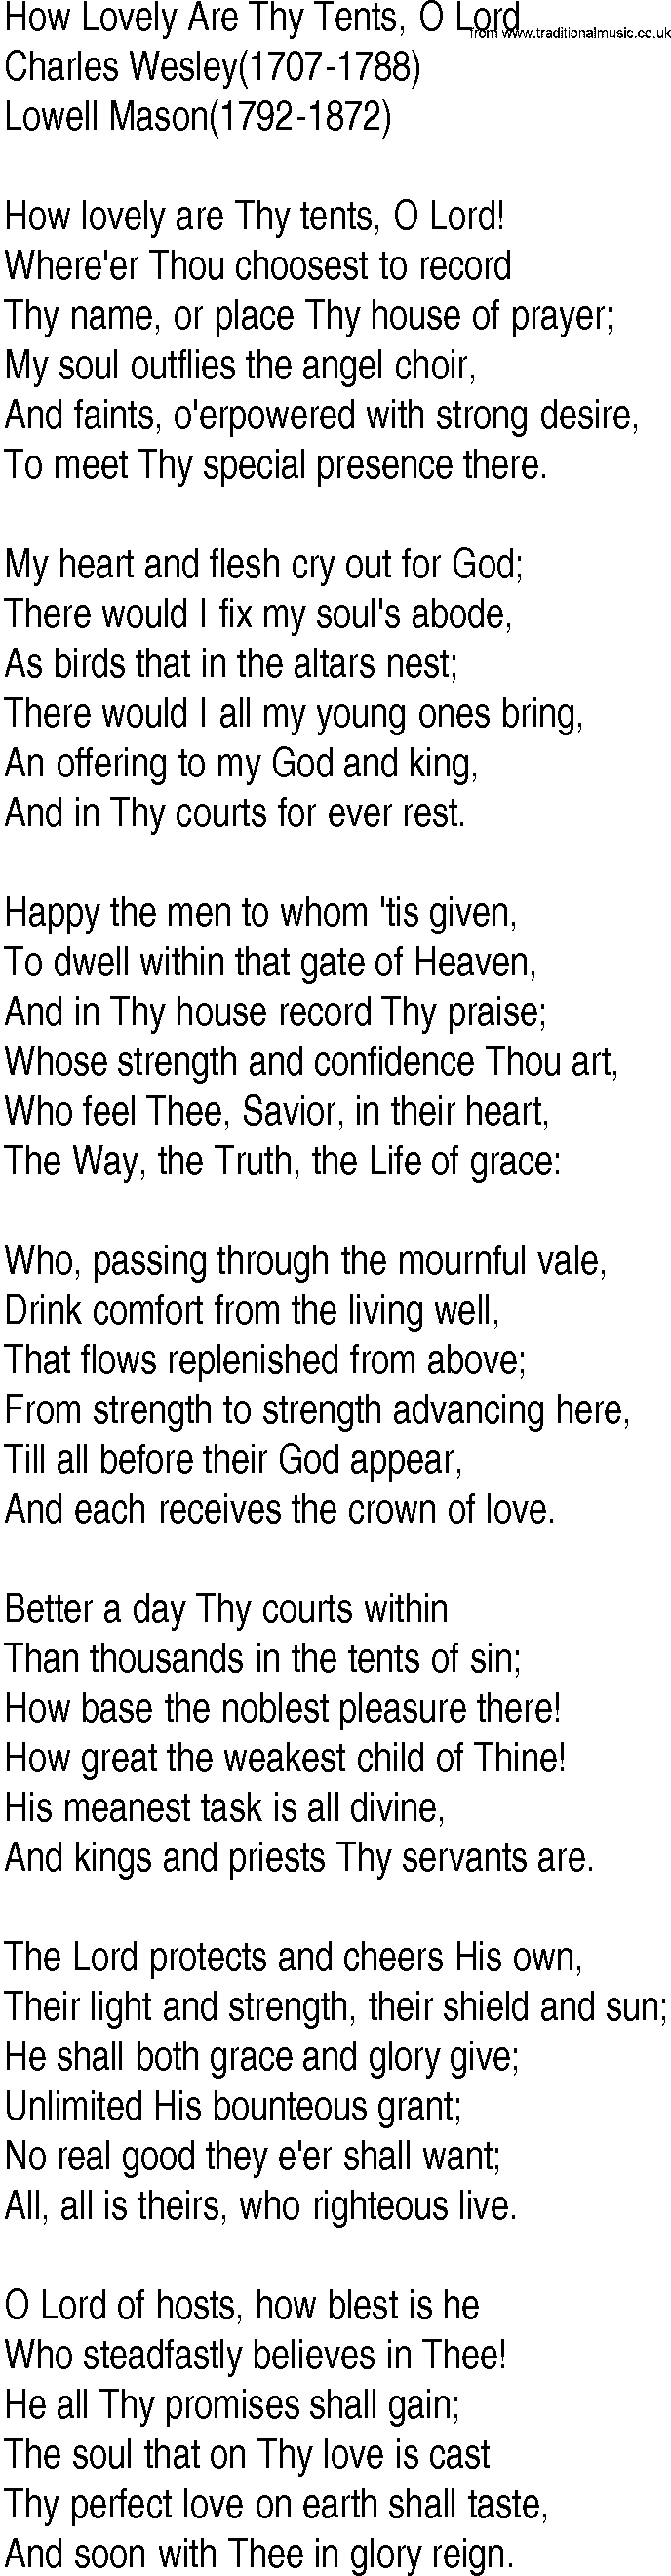 Hymn and Gospel Song: How Lovely Are Thy Tents, O Lord by Charles Wesley lyrics